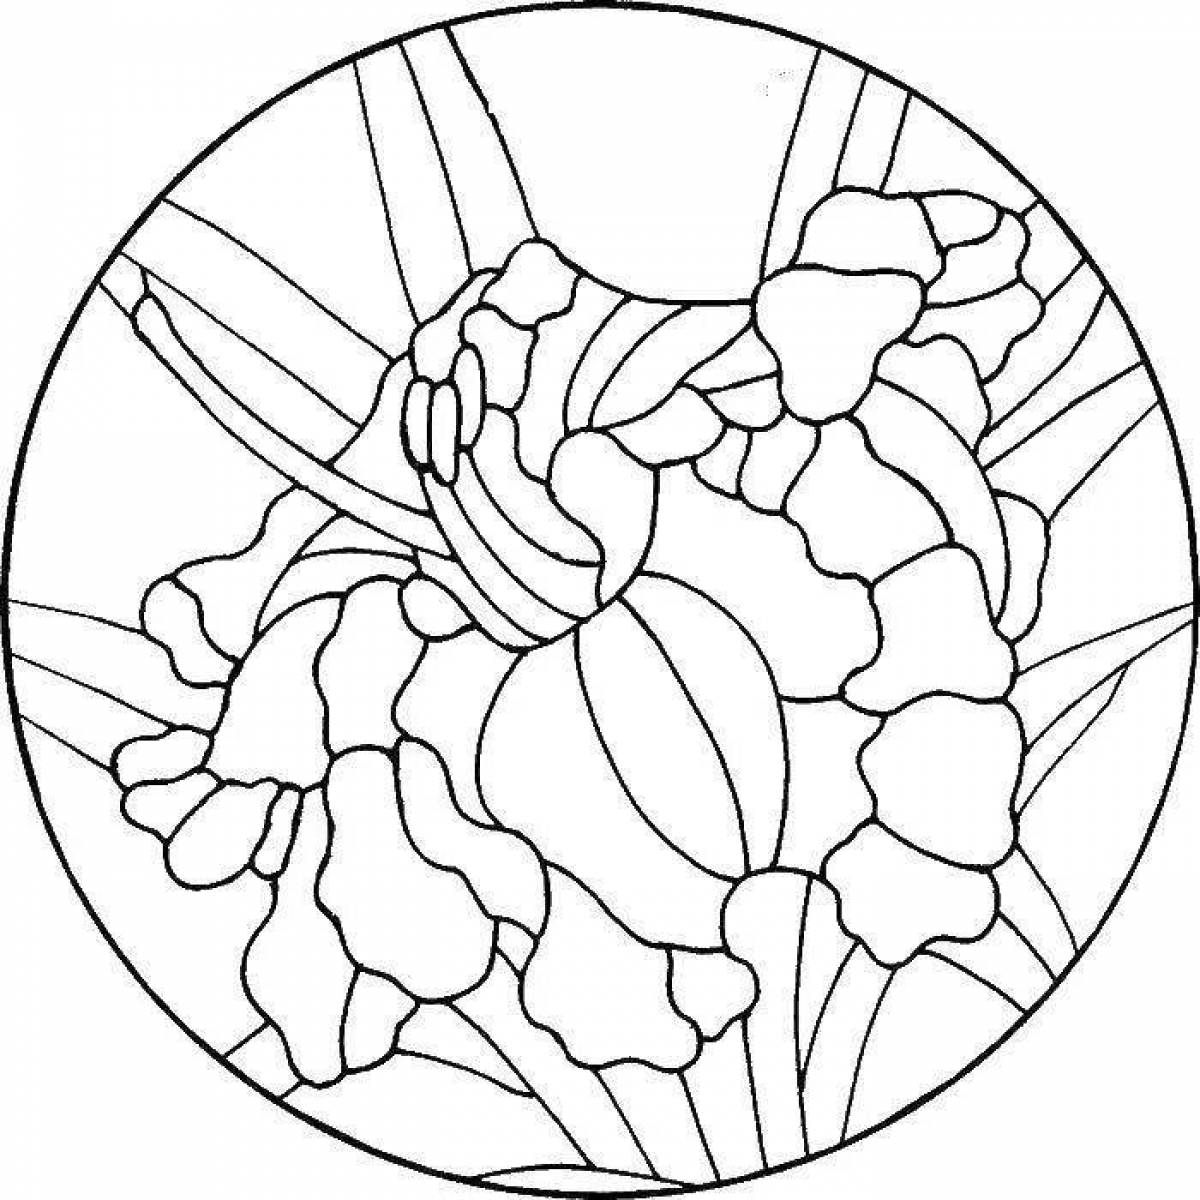 Bright stained glass coloring pages